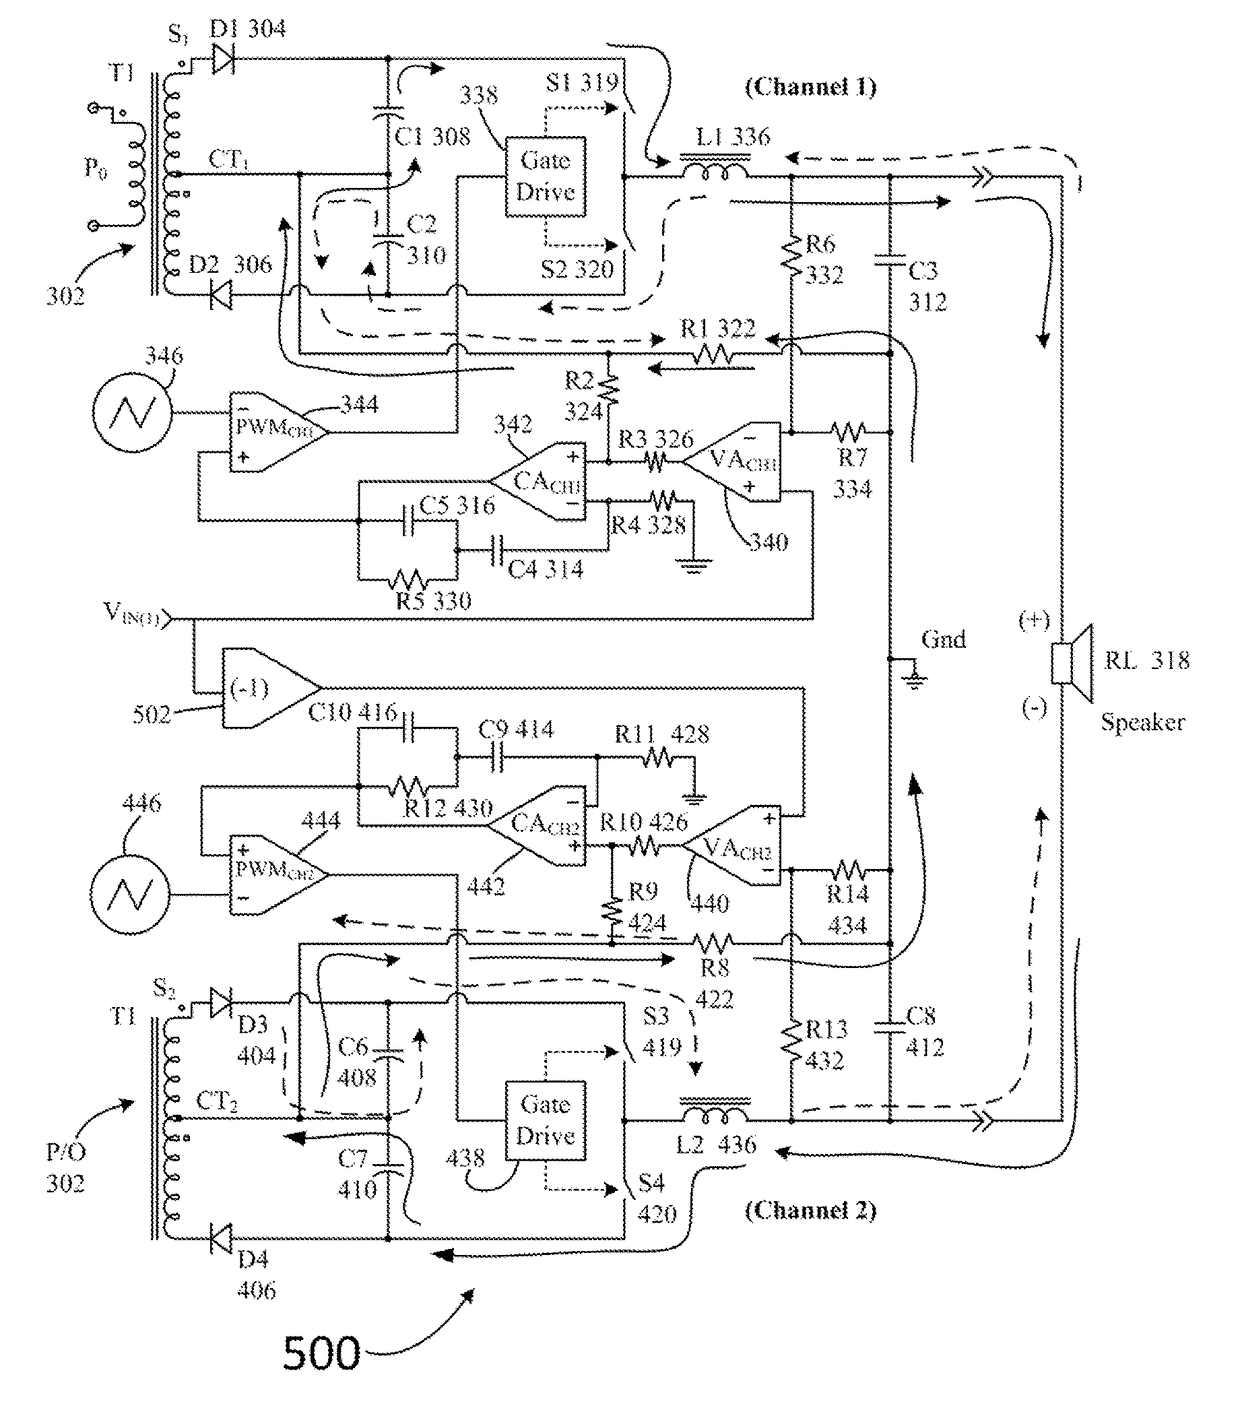 Average current-mode feedback control of multi-channel class-D audio amplifier